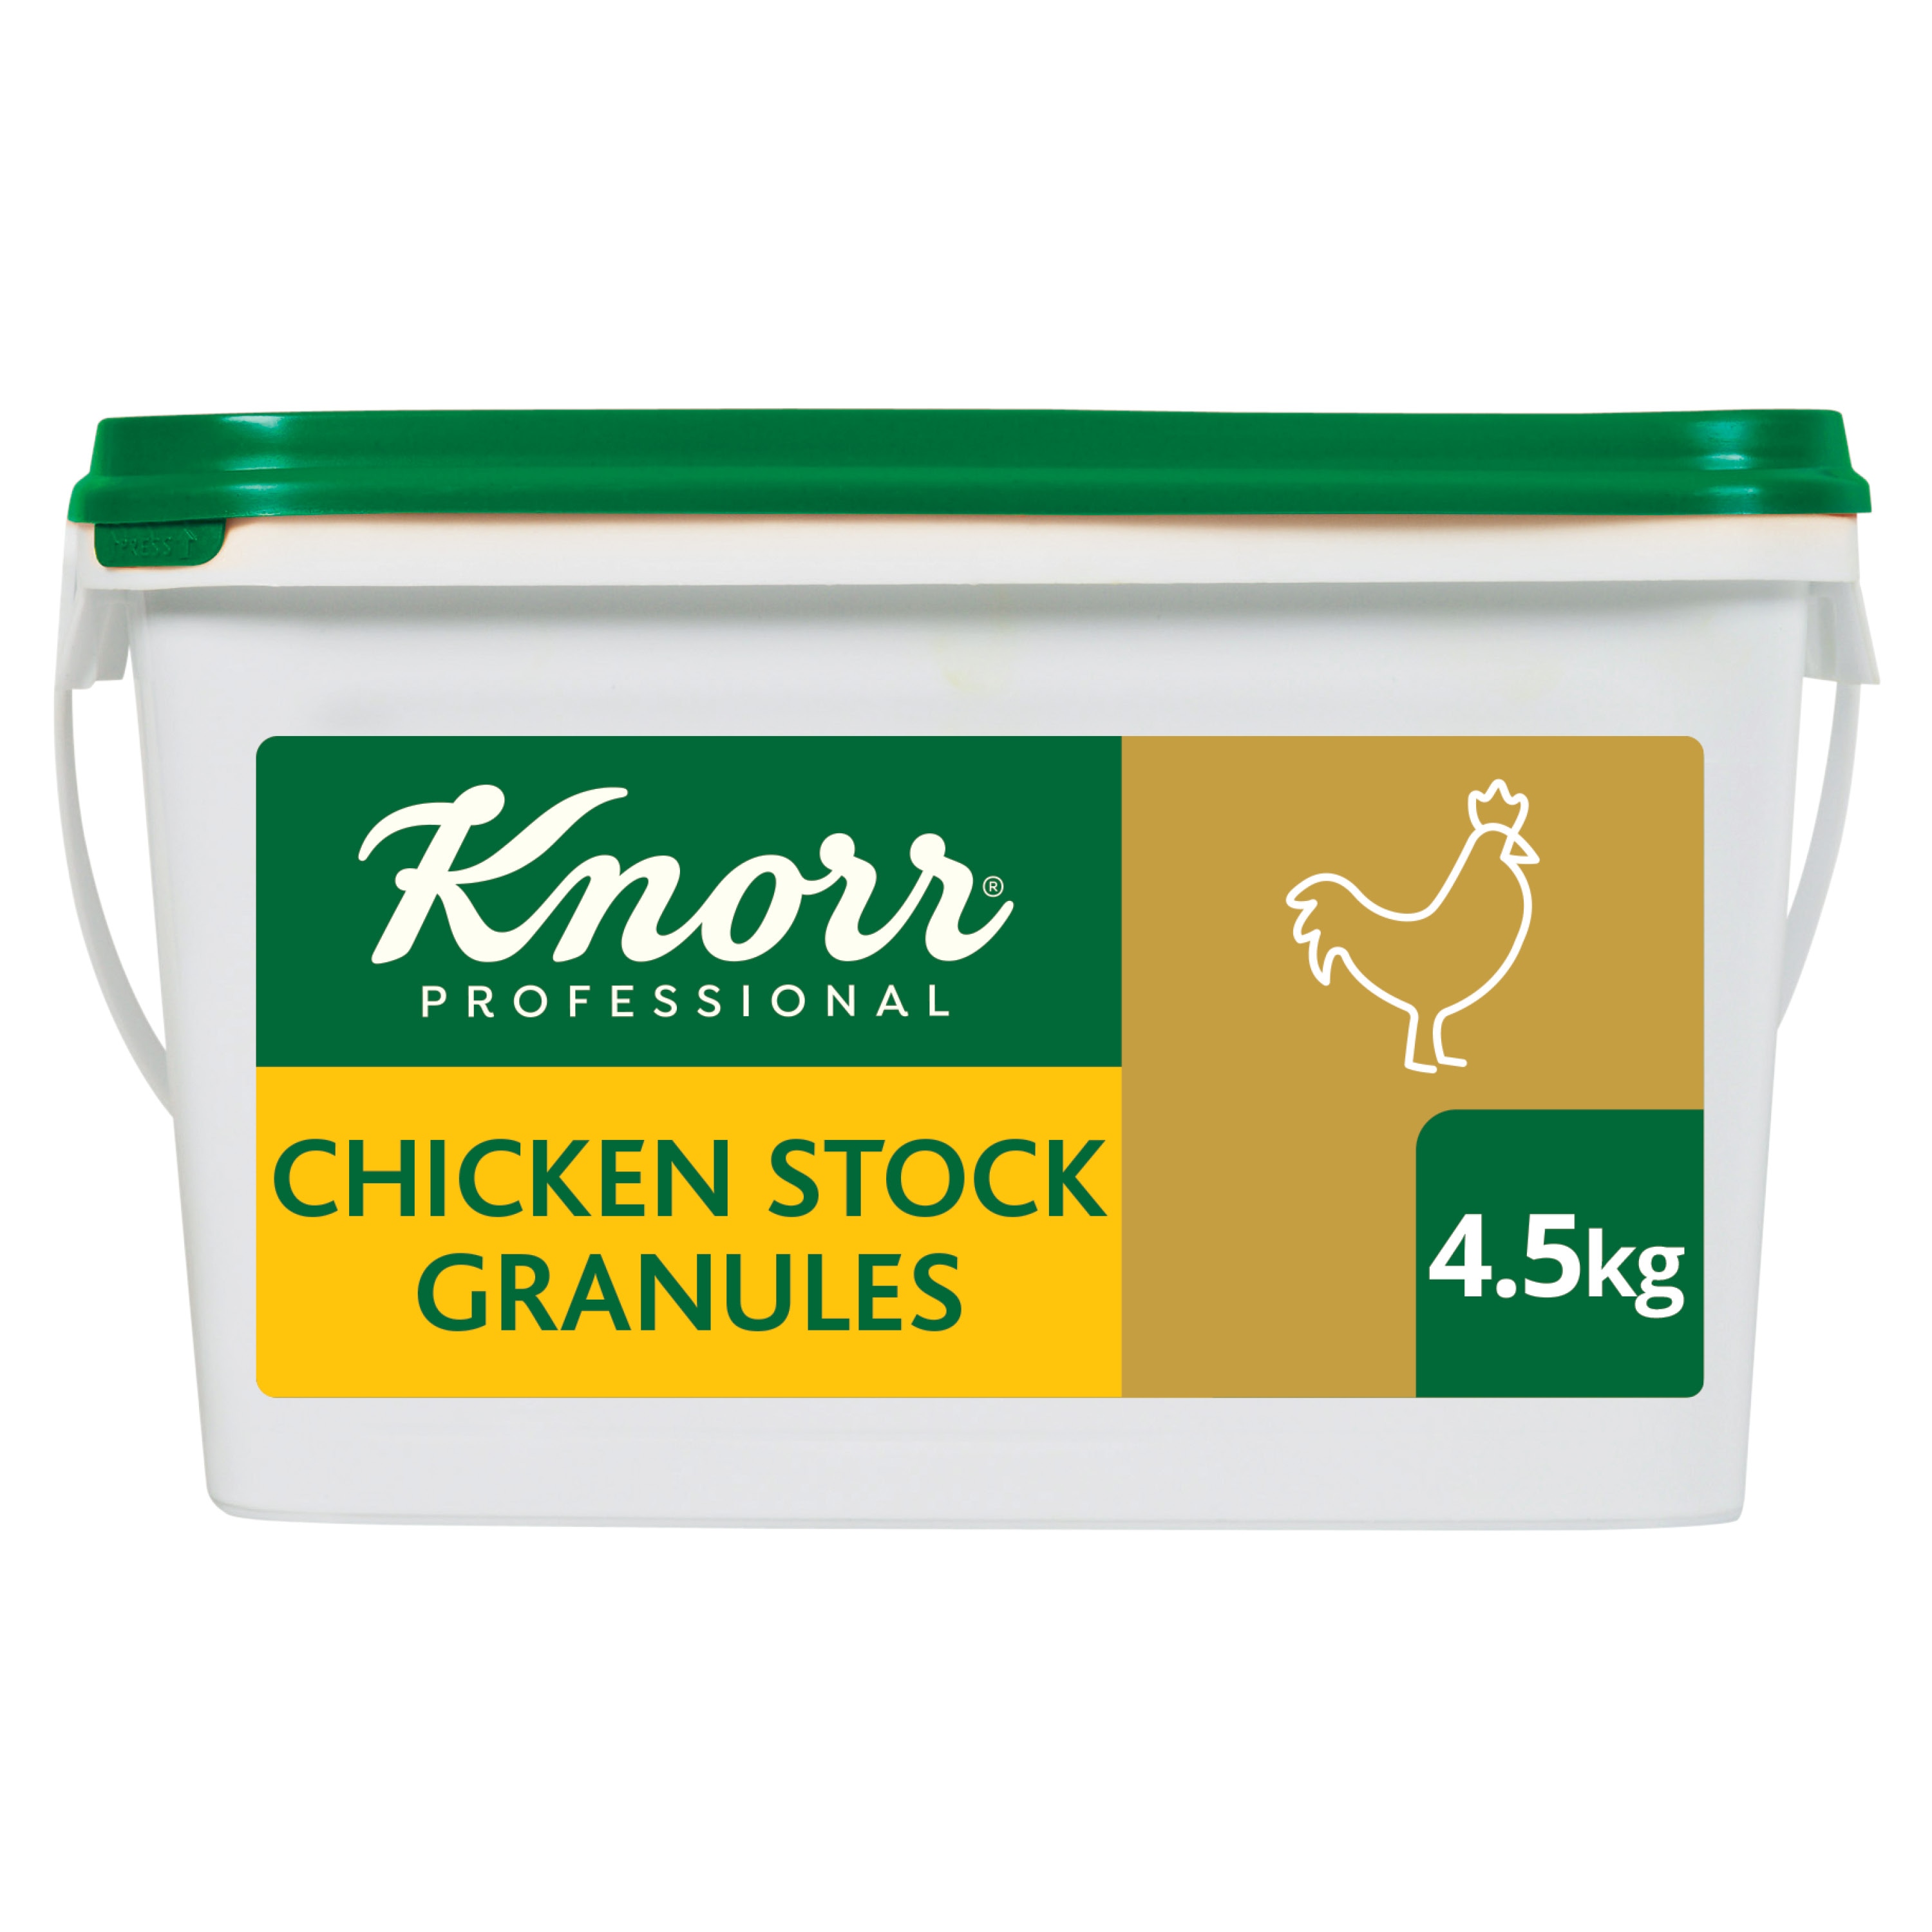 Knorr Professional Chicken Stock Granules 4.5kg - Here’s an ingredient made with real chicken that adds flavour and not saltiness to the dish.